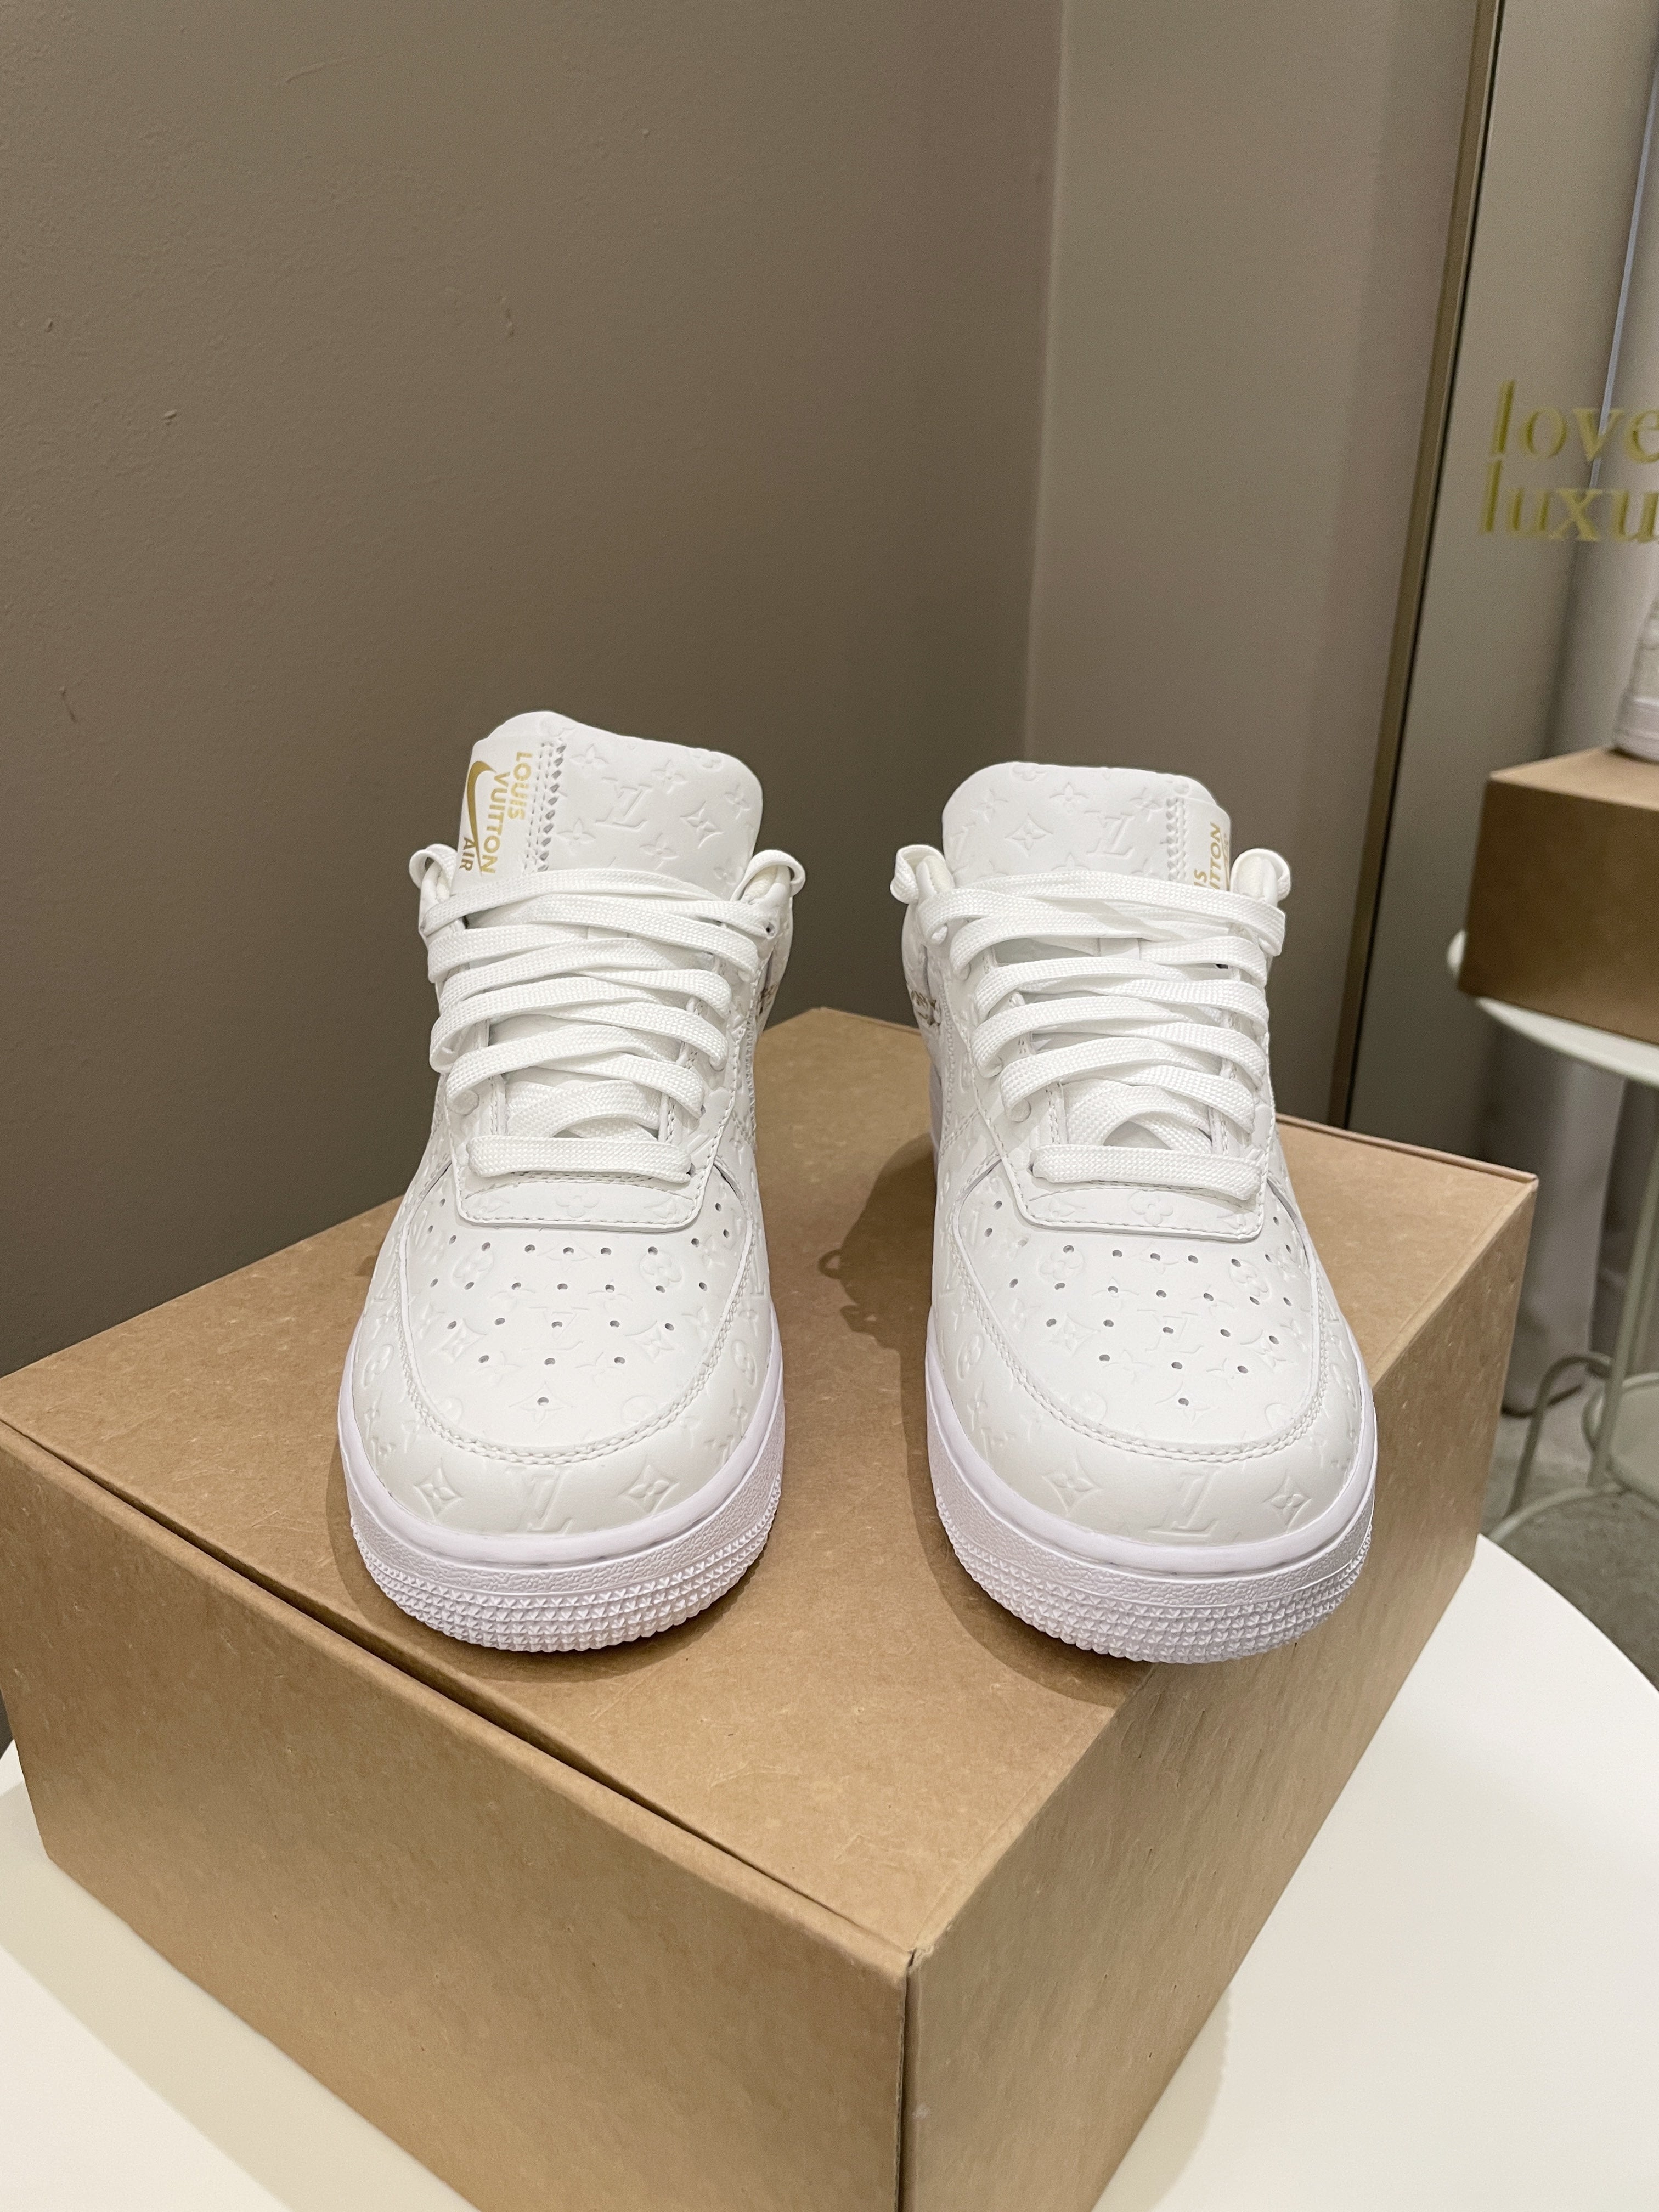 Louis Vuitton Air Force 1 sneakers White US 7